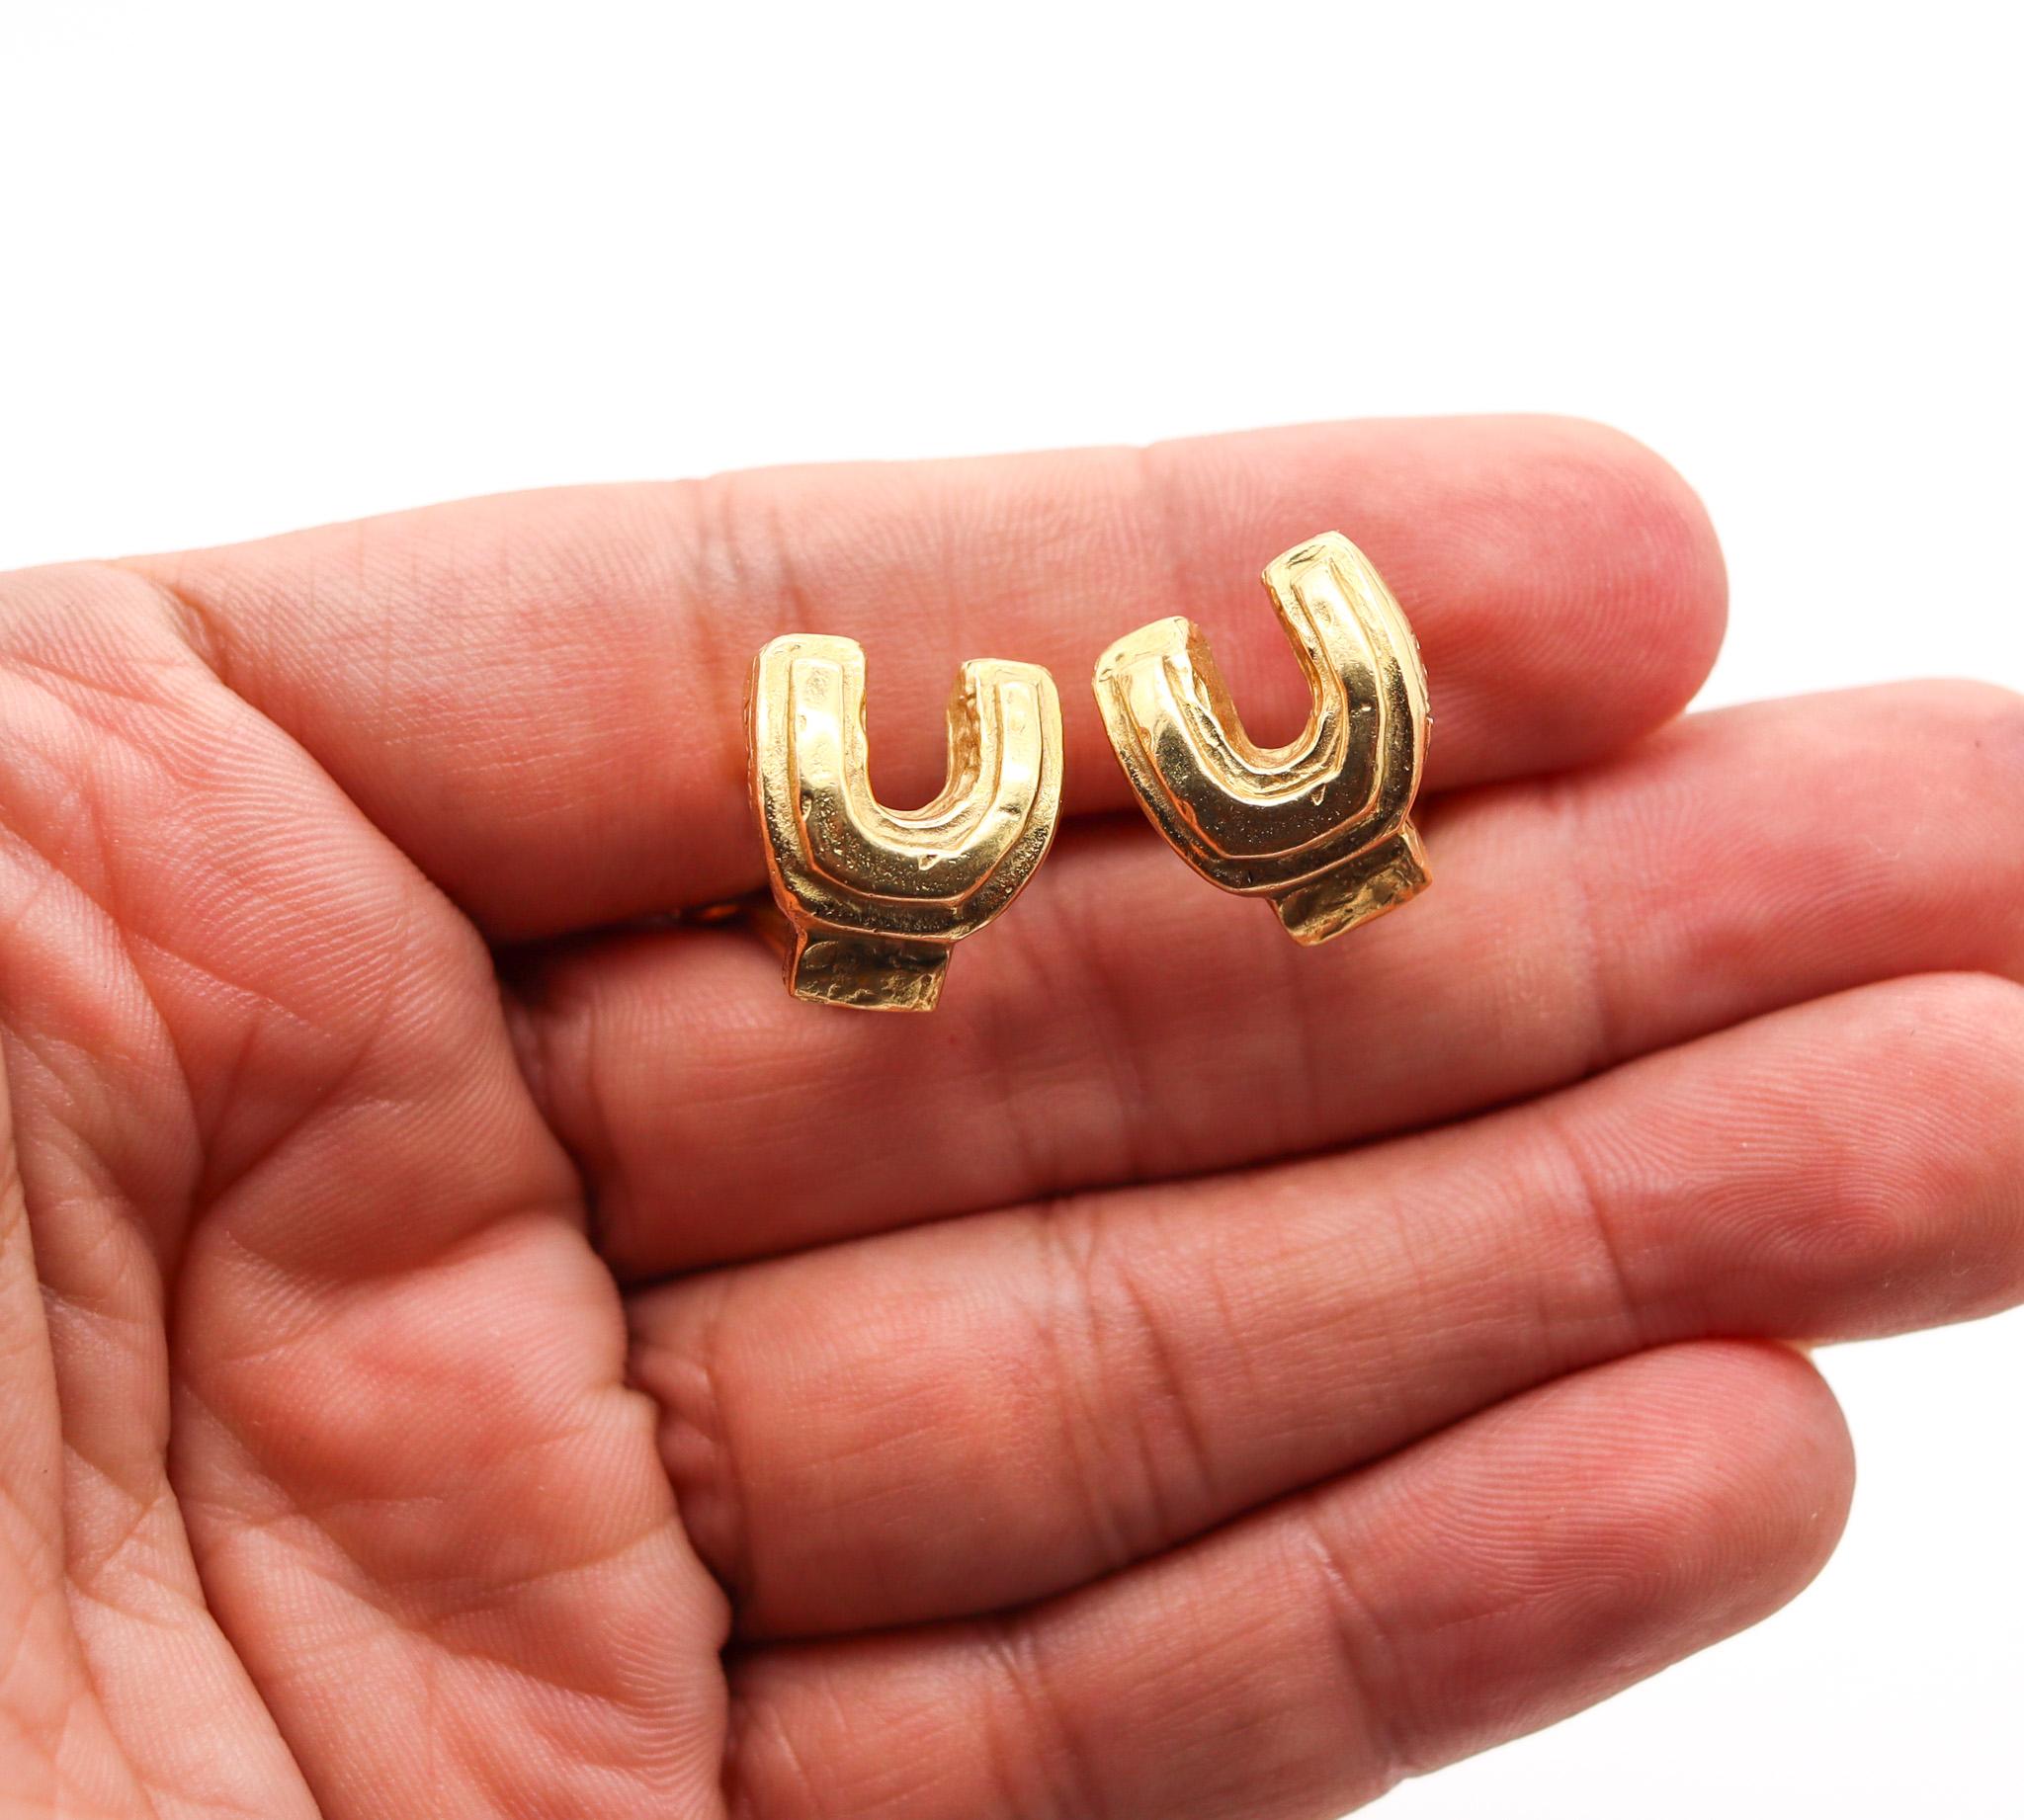 Liuba Wolf 1970 Sao Paulo Concretism Sculptural Earrings  In 18Kt Yellow Gold In Excellent Condition For Sale In Miami, FL